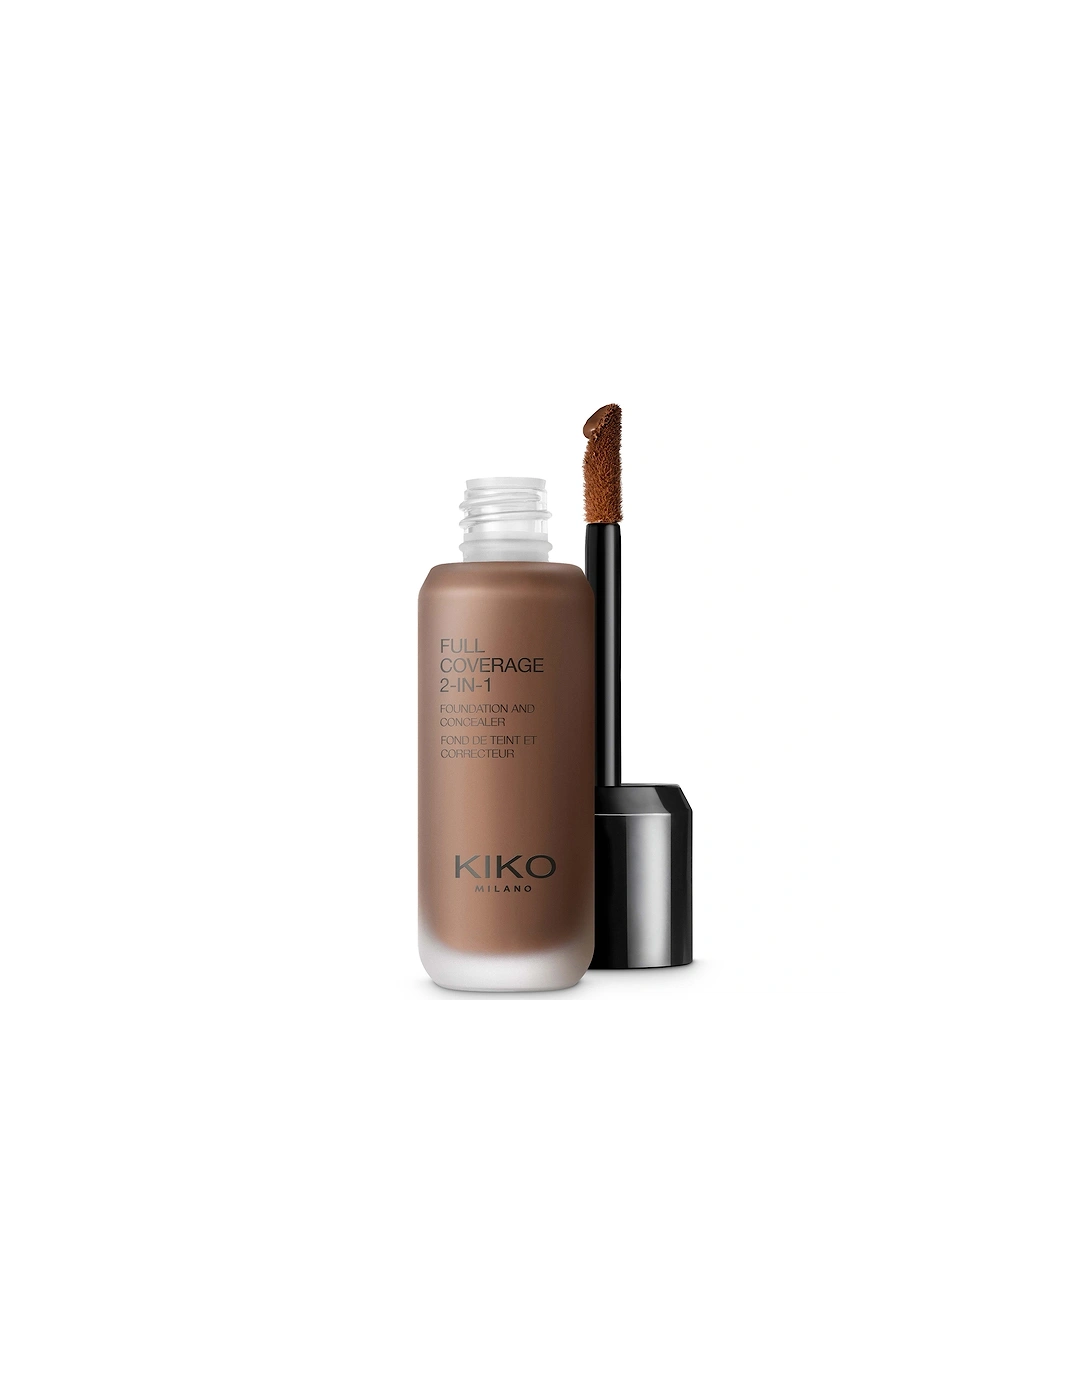 Full Coverage 2-in-1 Foundation and Concealer 25ml - 200 Neutral, 2 of 1